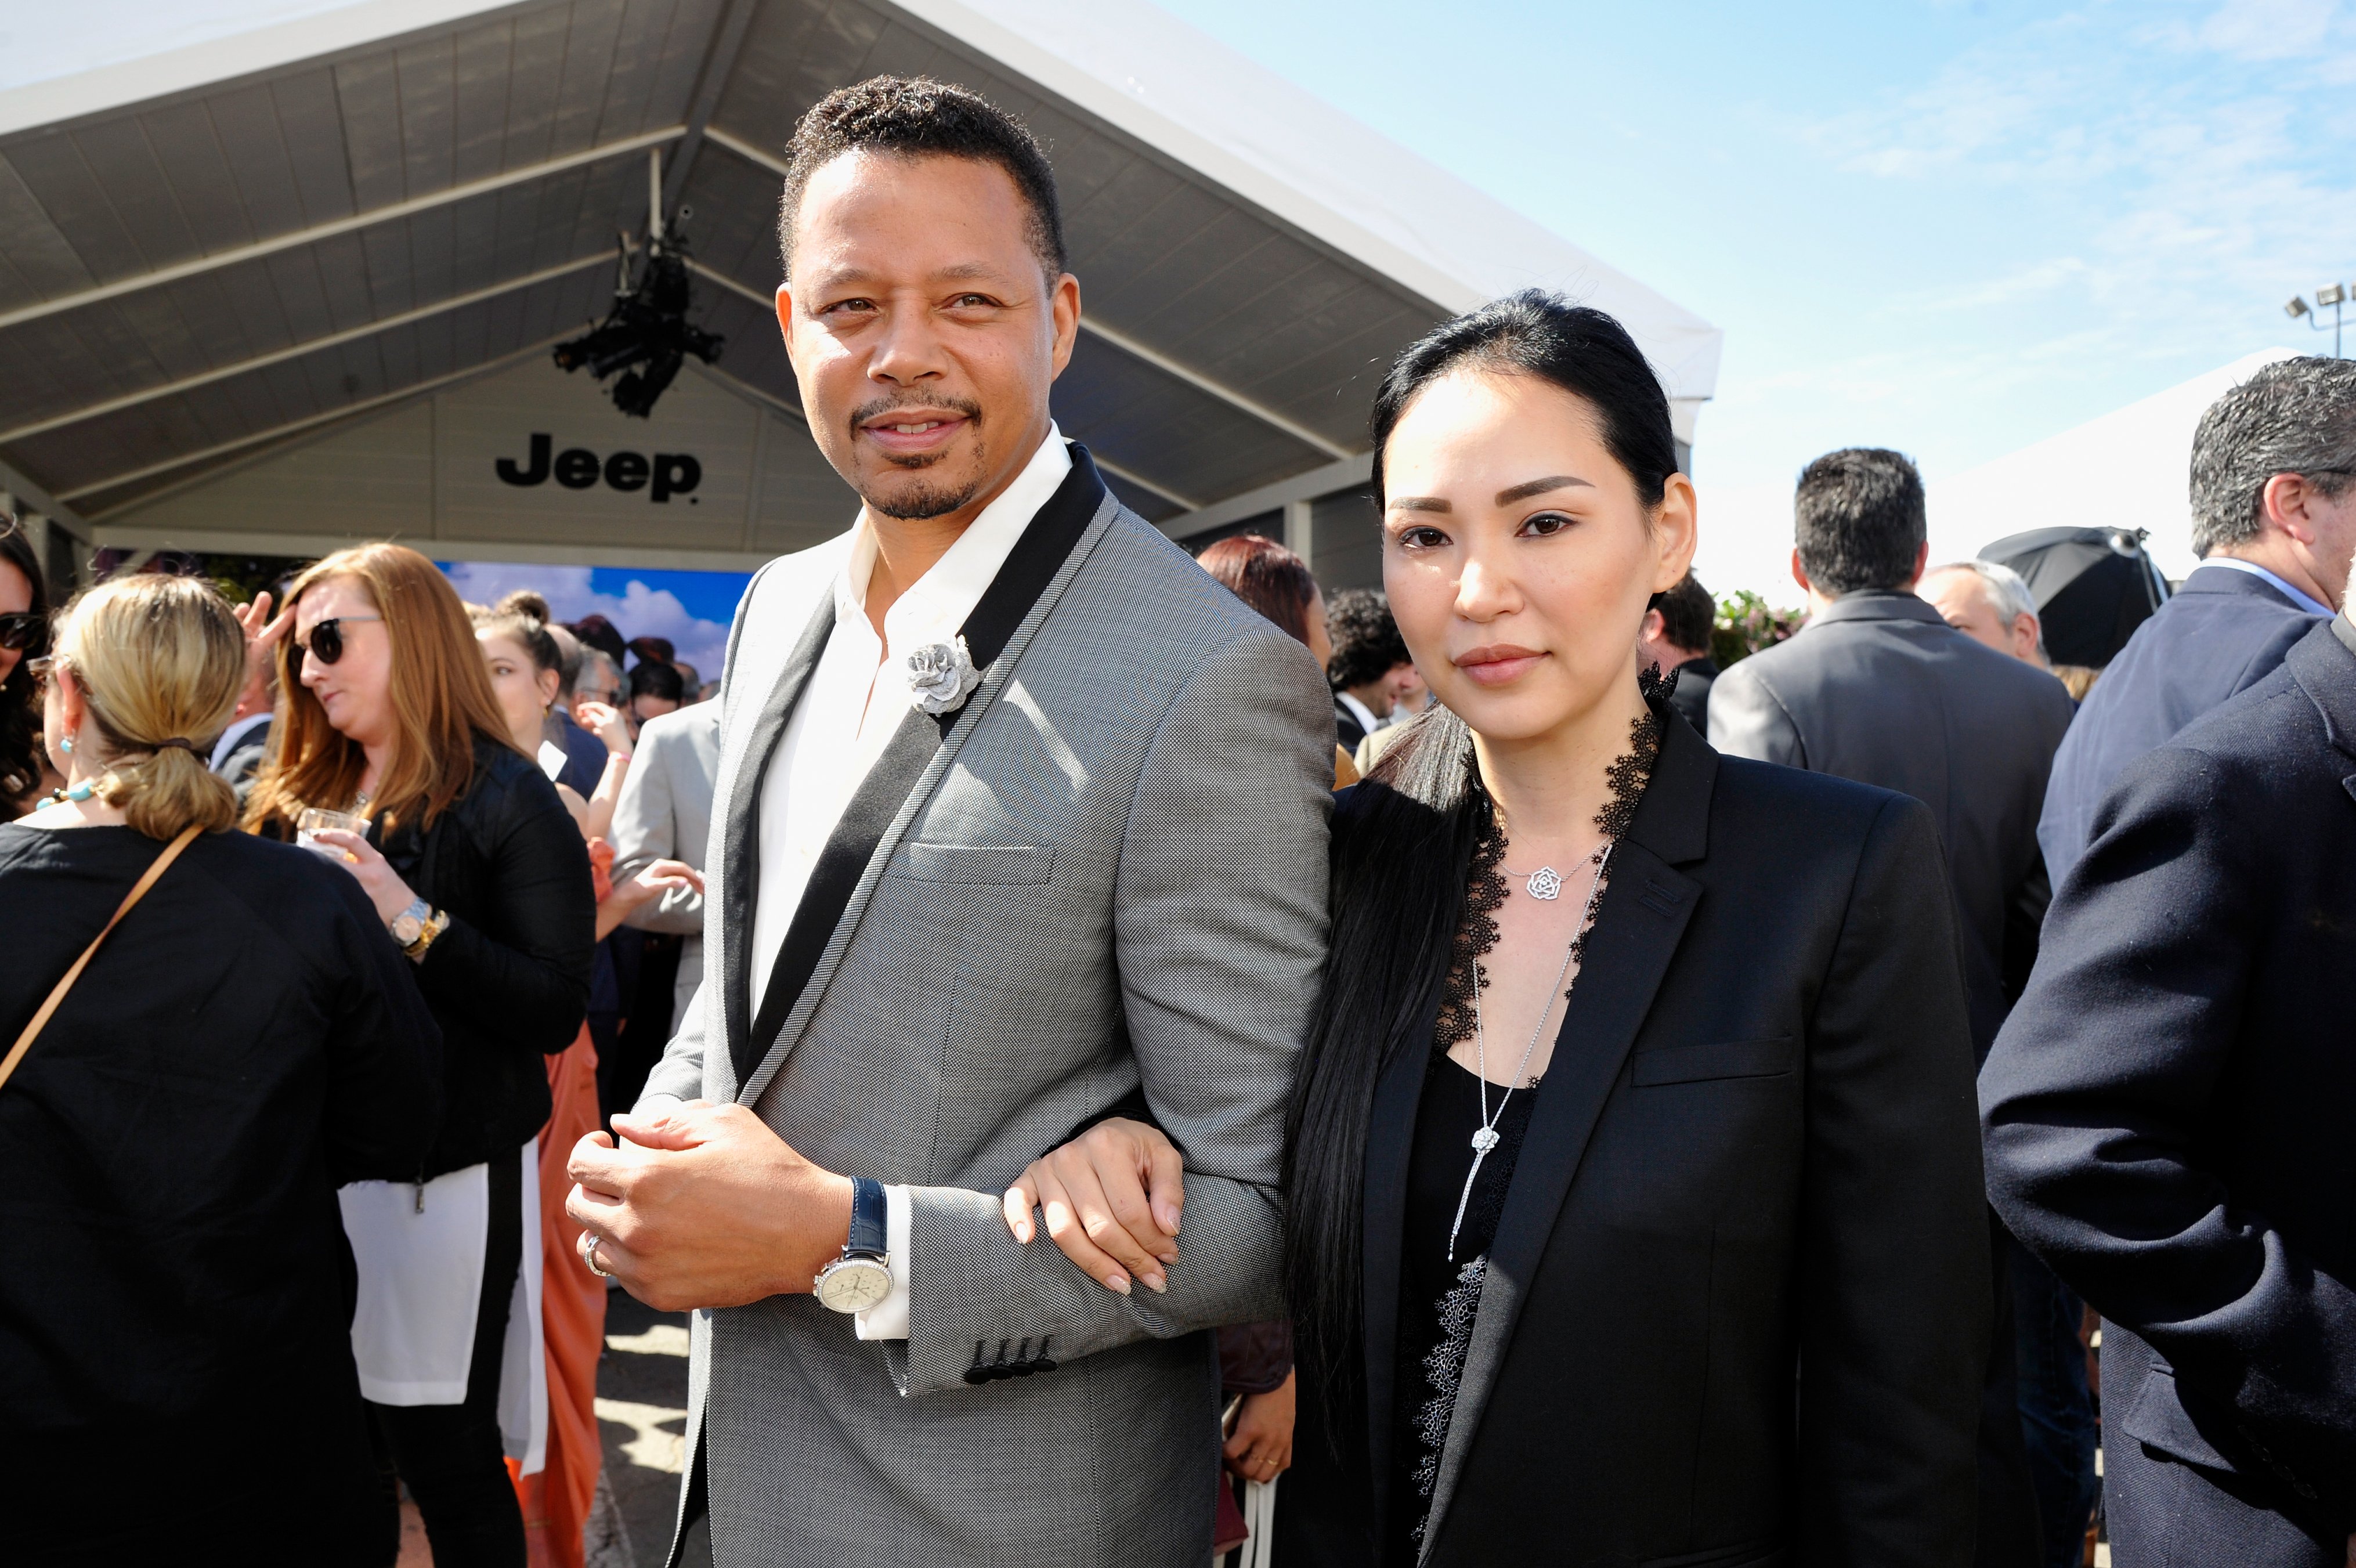 Terrence Howard and Mira Pak at the 2017 Independent Spirit Awards in Santa Monica Pier in February 2017. | Photo: Getty Images